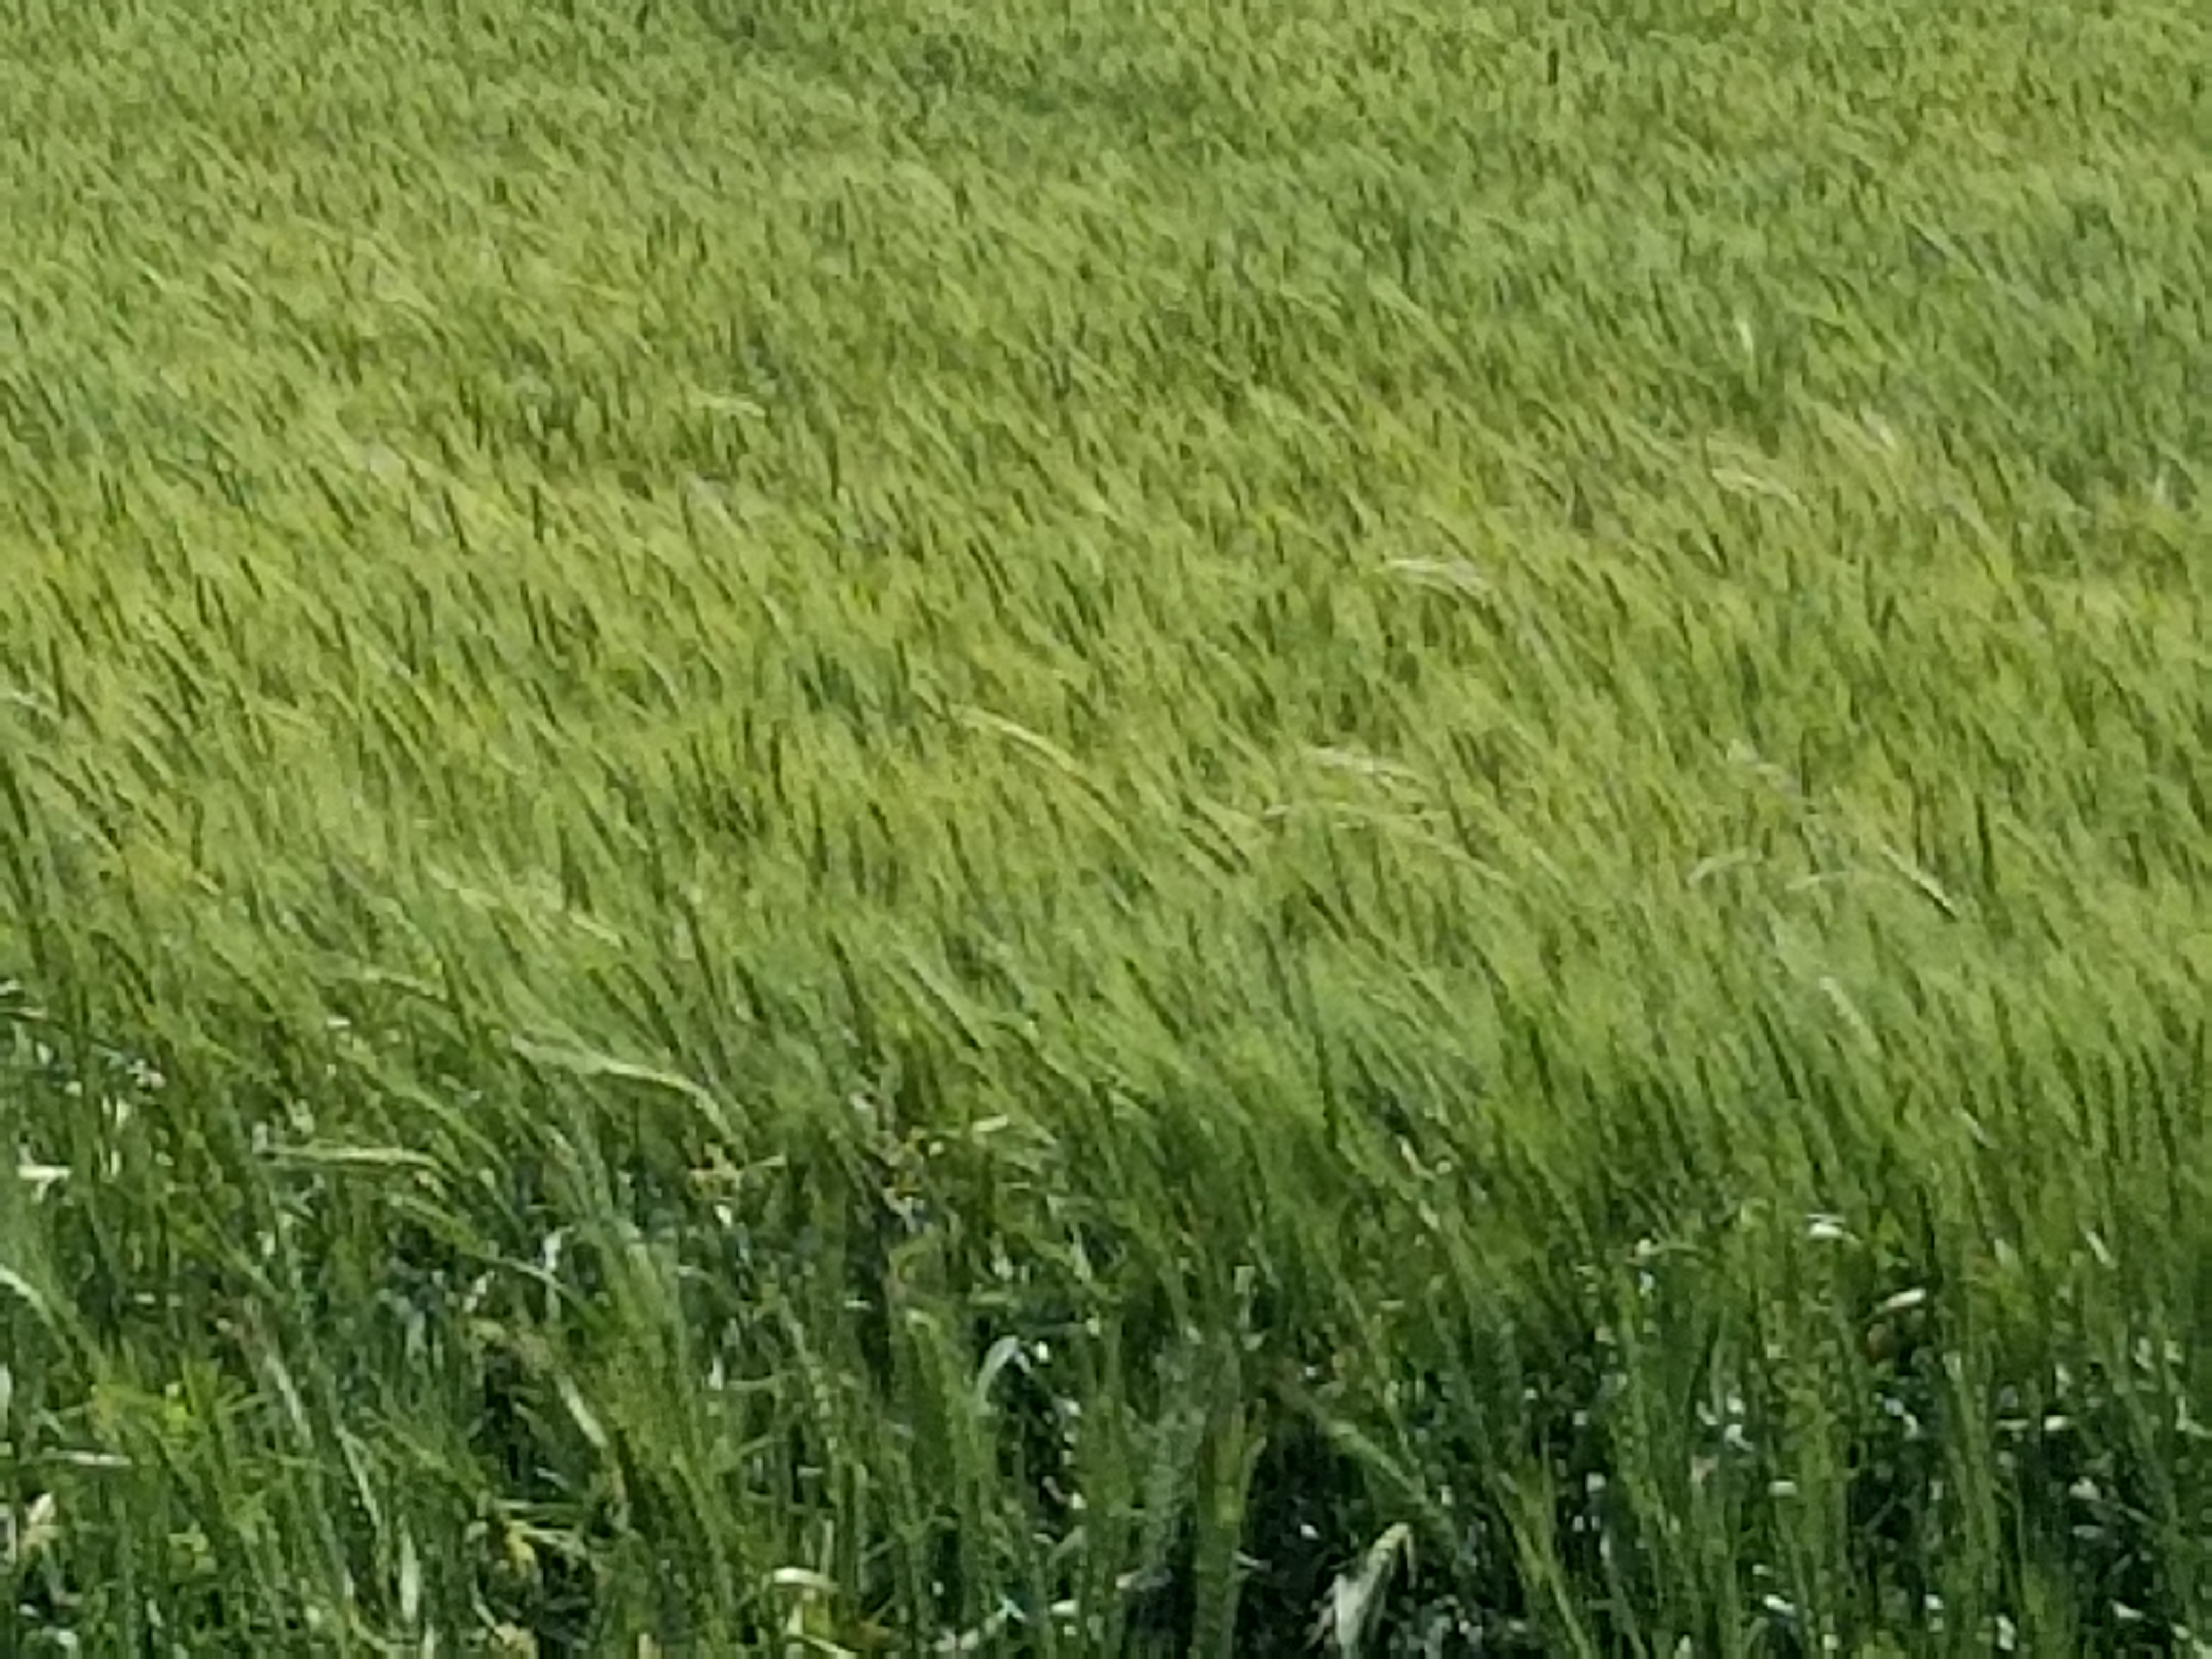 Texas Winter Wheat Crop Could be Better Than Expected